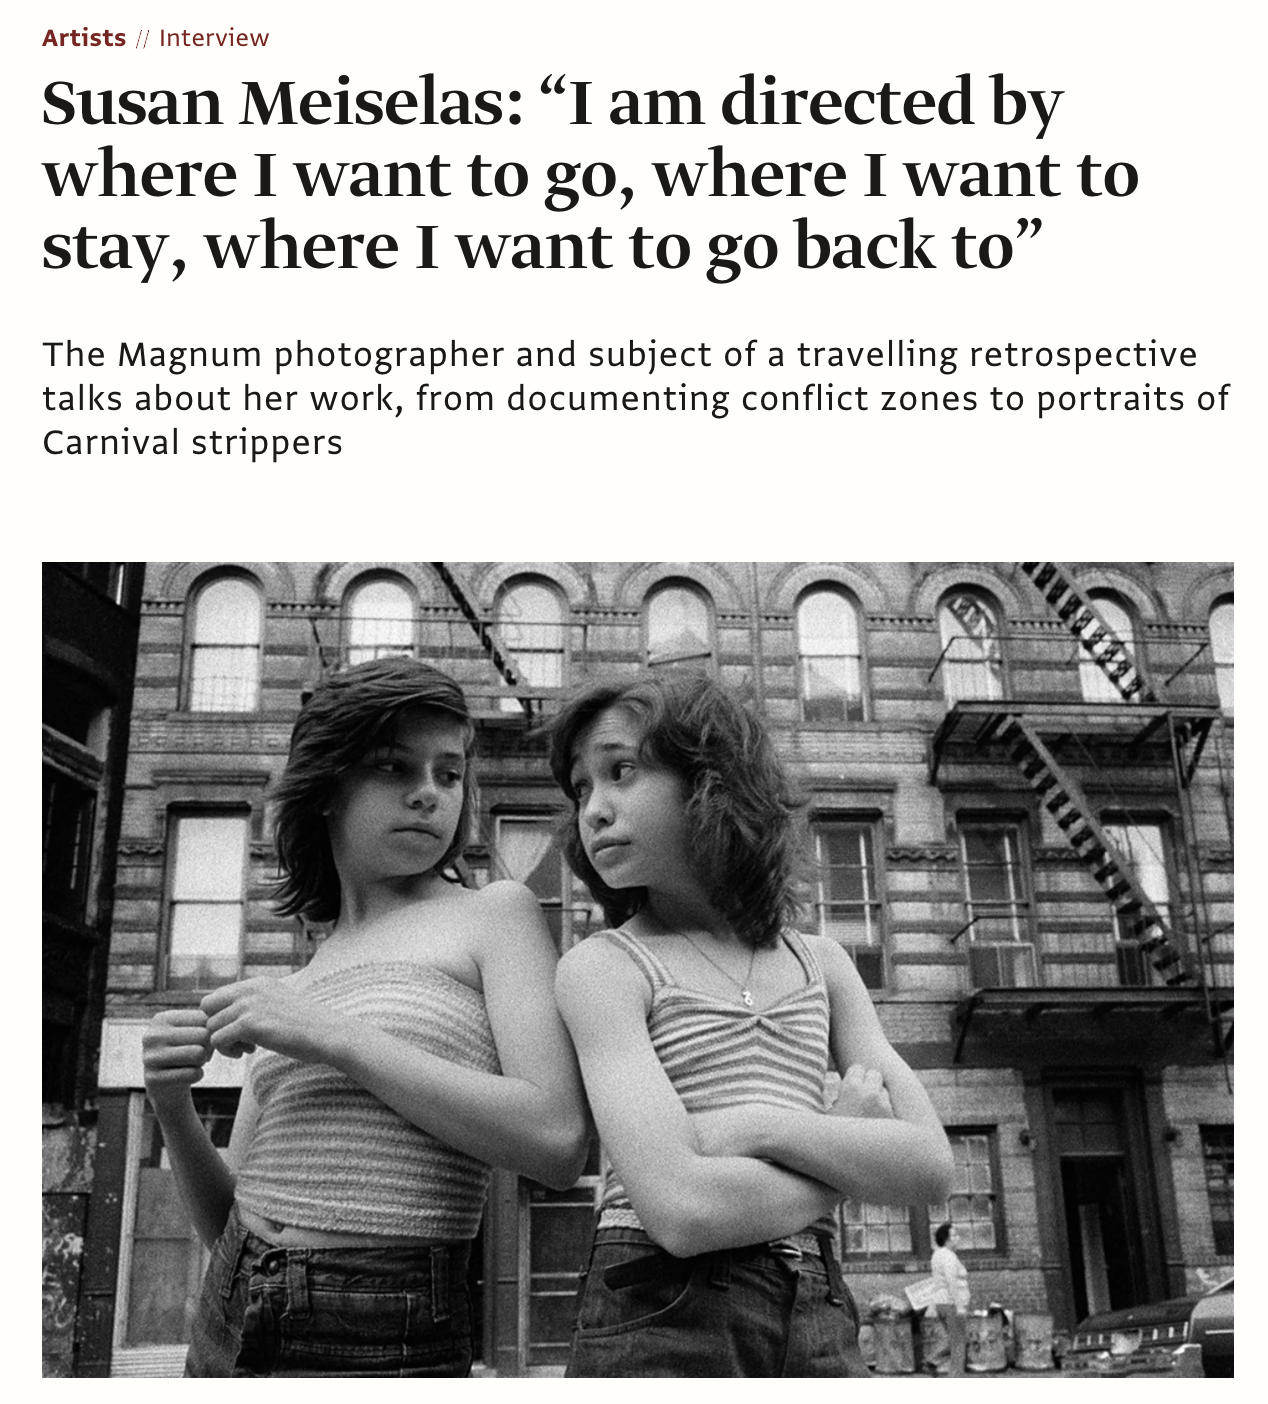 The Art Newspaper: Susan Meiselas: “I am directed by where I want to go, where I want to stay, where I want to go back to”